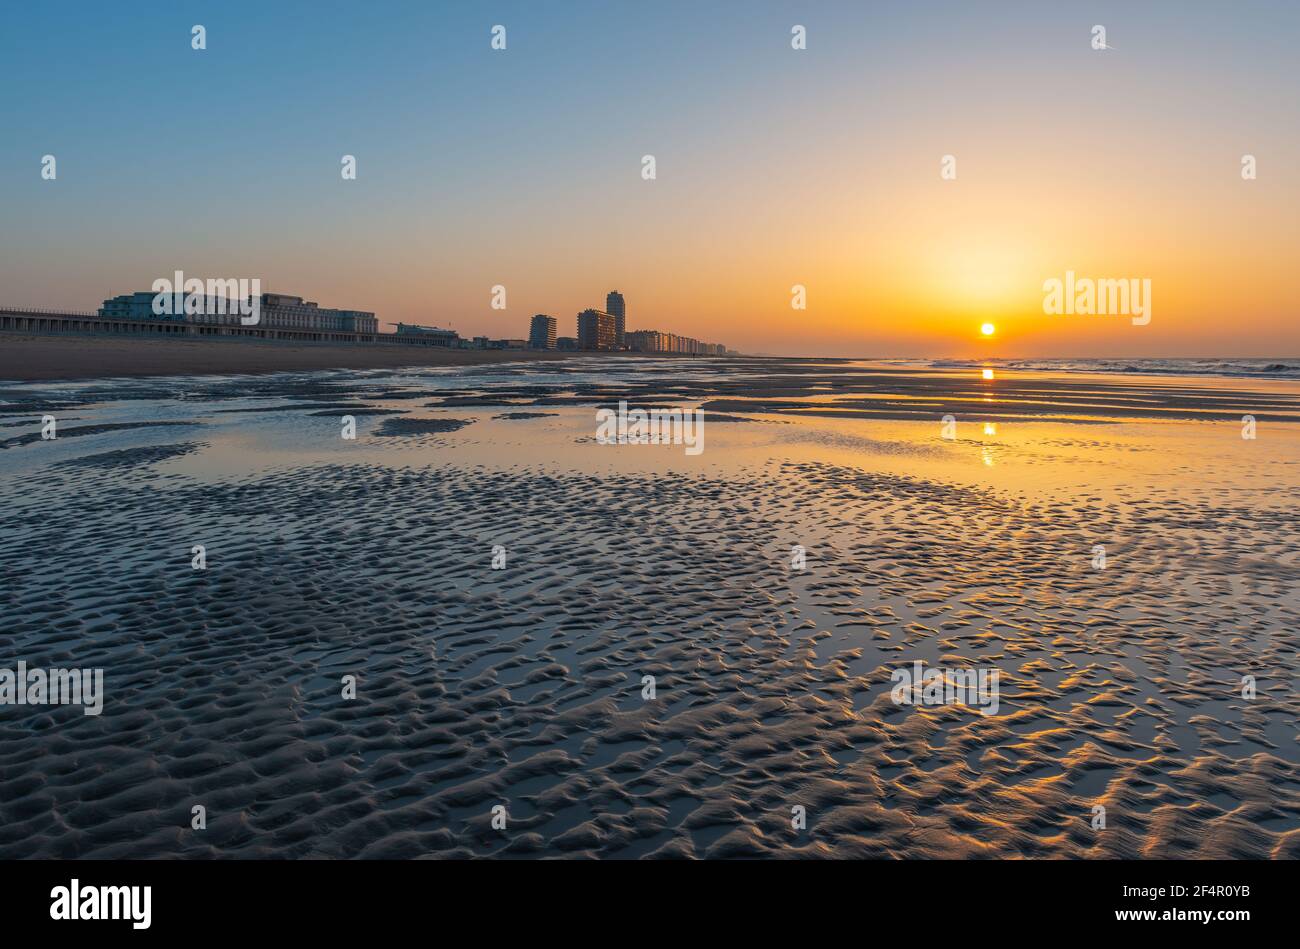 Oostende (Ostend) beach by the North Sea at sunset with sand ripples, West Flanders, Belgium. Stock Photo